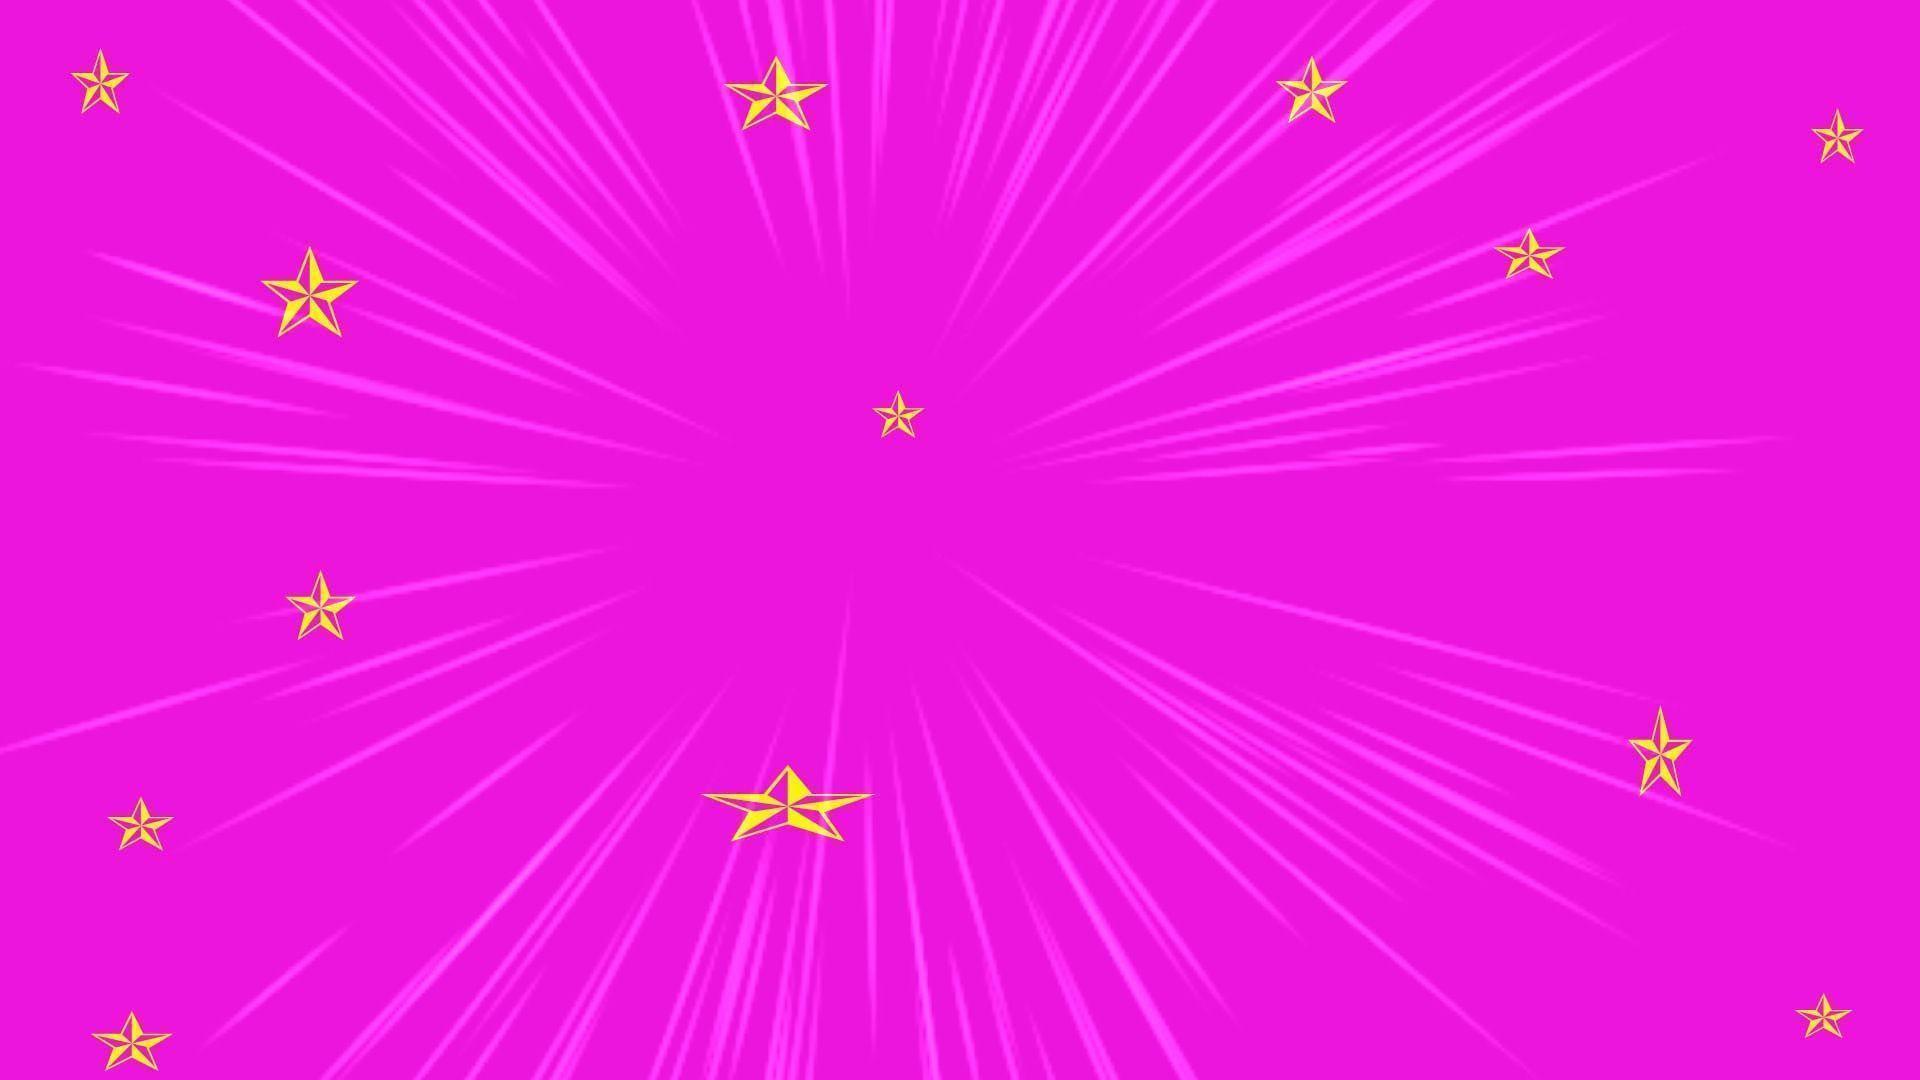 Bright Pink Backgrounds - Wallpaper Cave